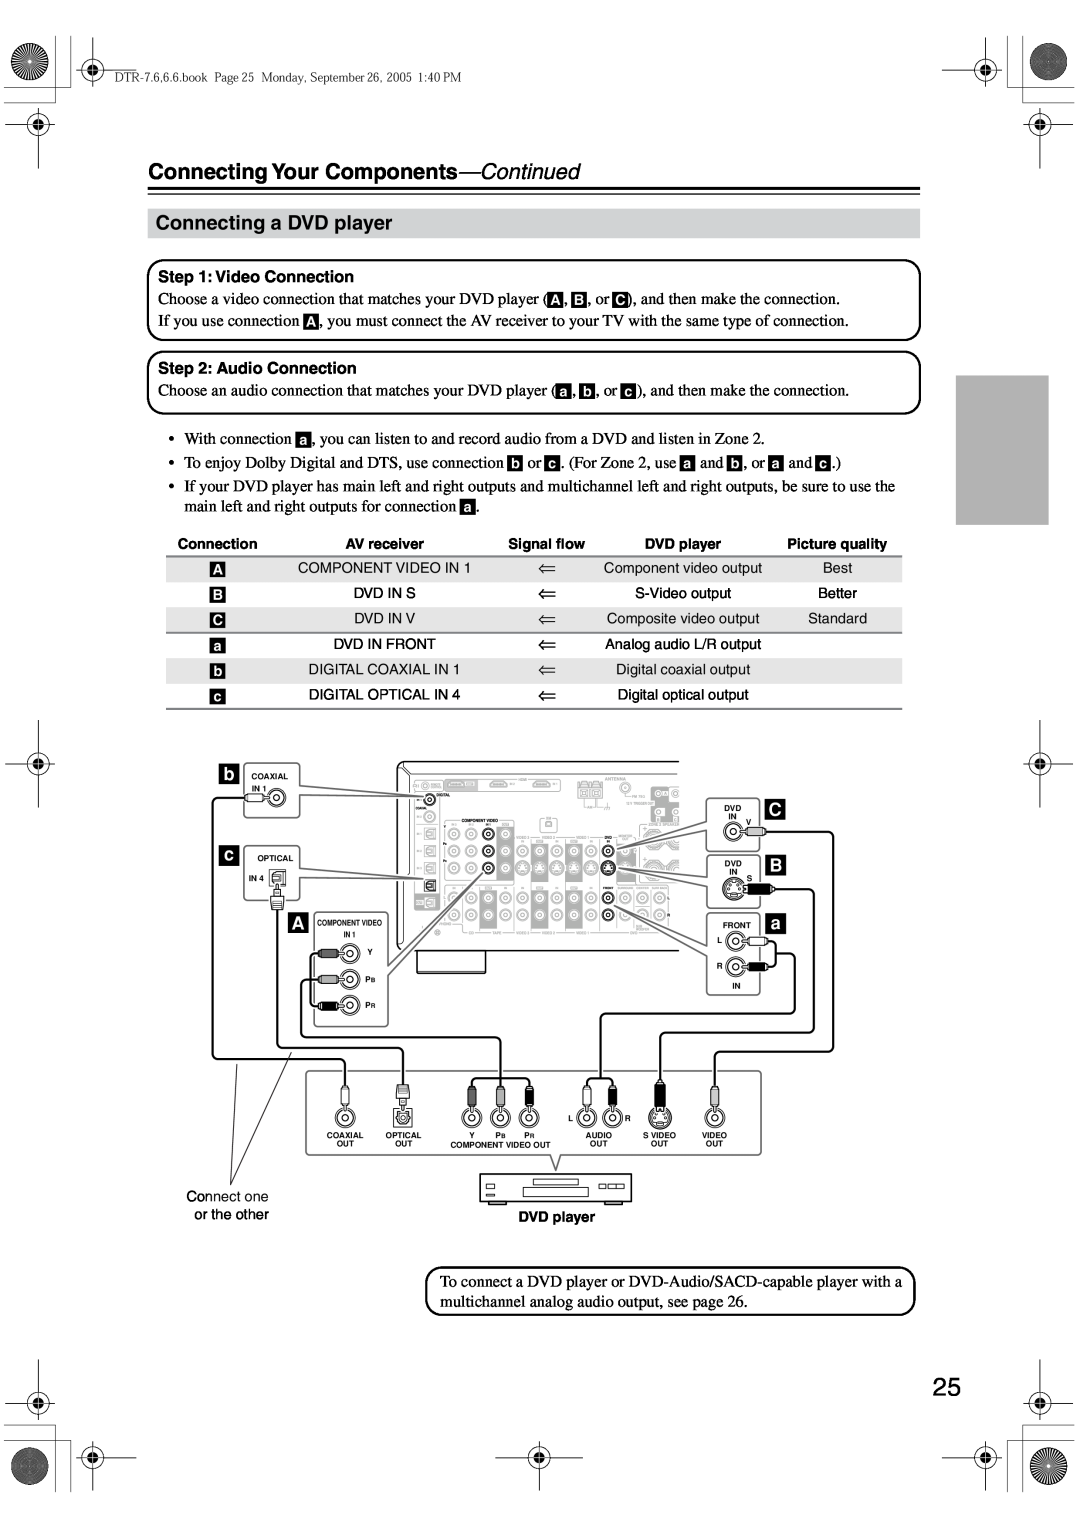 Integra DTR-7.6/6.6 instruction manual Connecting a DVD player, C B a, Connecting Your Components—Continued 